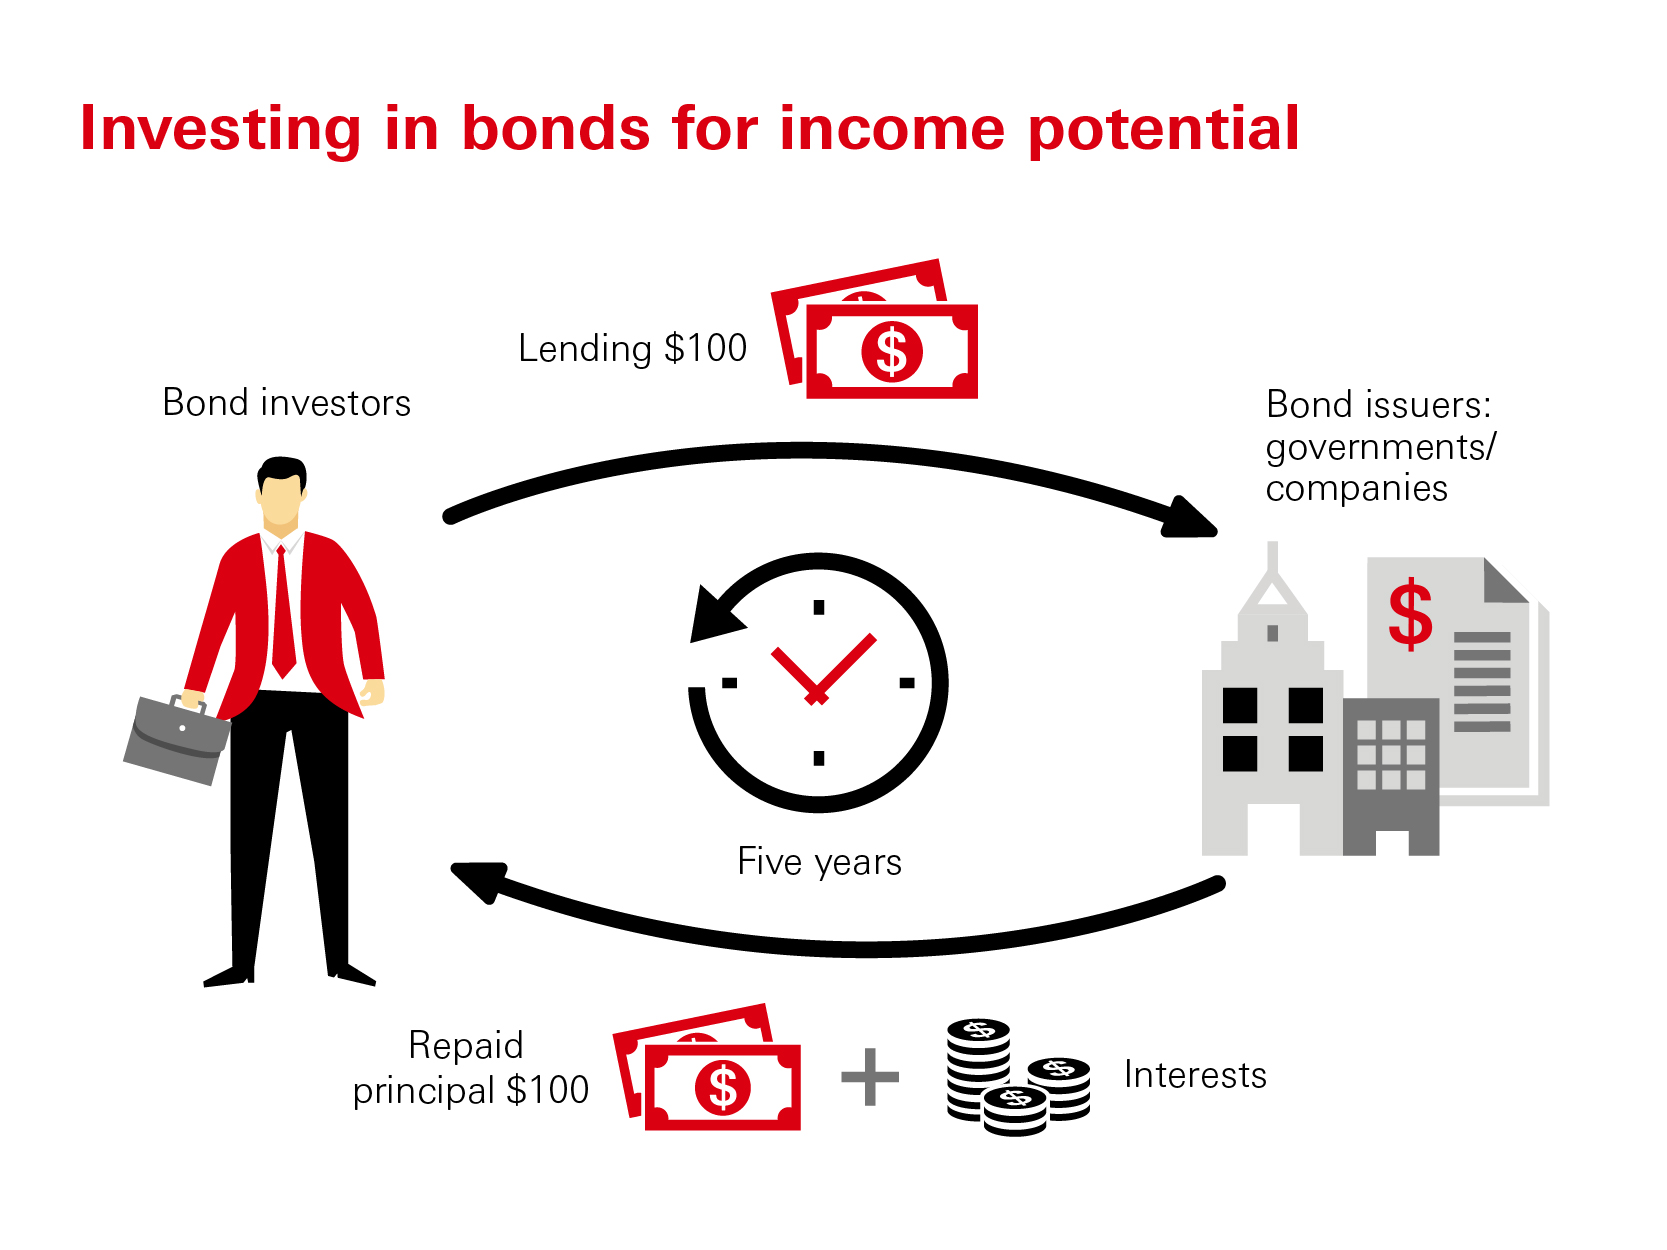 Bond is a form of loans issued by governments or companies in order to raise funds. Take a bond with a face value of $100, coupon rate 5% and tenor of five years. Its holders can receive $5 of coupon payment in the first four years and another $5 plus the principal the final year.